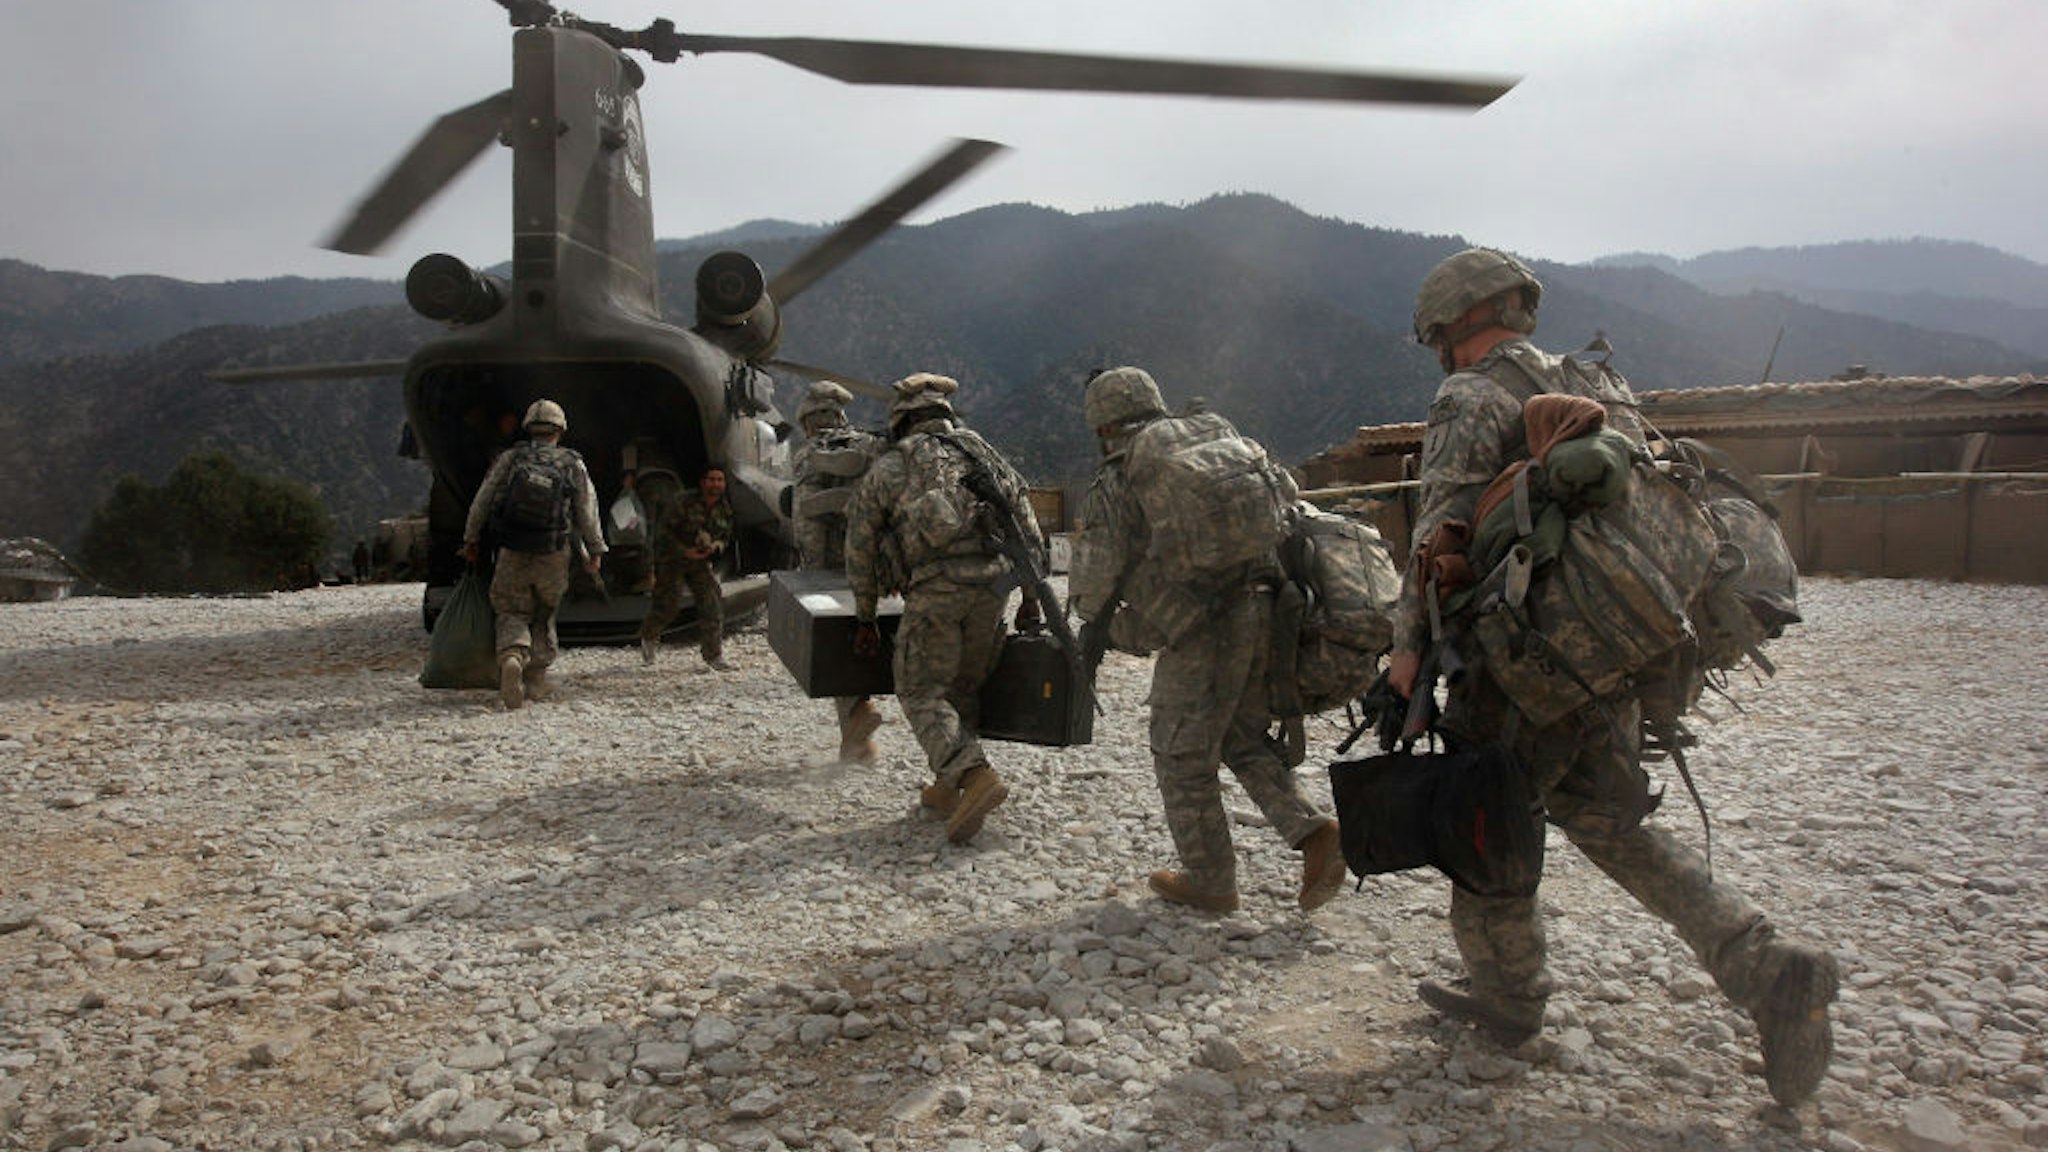 KORENGAL VALLEY, AFGHANISTAN - OCTOBER 27: U.S. soldiers board an Army Chinook transport helicopter after it brought fresh soldiers and supplies to the Korengal Outpost on October 27, 2008 in the Korengal Valley, Afghanistan. The military spends huge effort and money to fly in supplies to soldiers of the 1-26 Infantry based in the Korengal Valley, site of some of the fiercest fighting of the Afghan war. The unpaved road into the remote area is bad and will become more treacherous with the onset of winter.